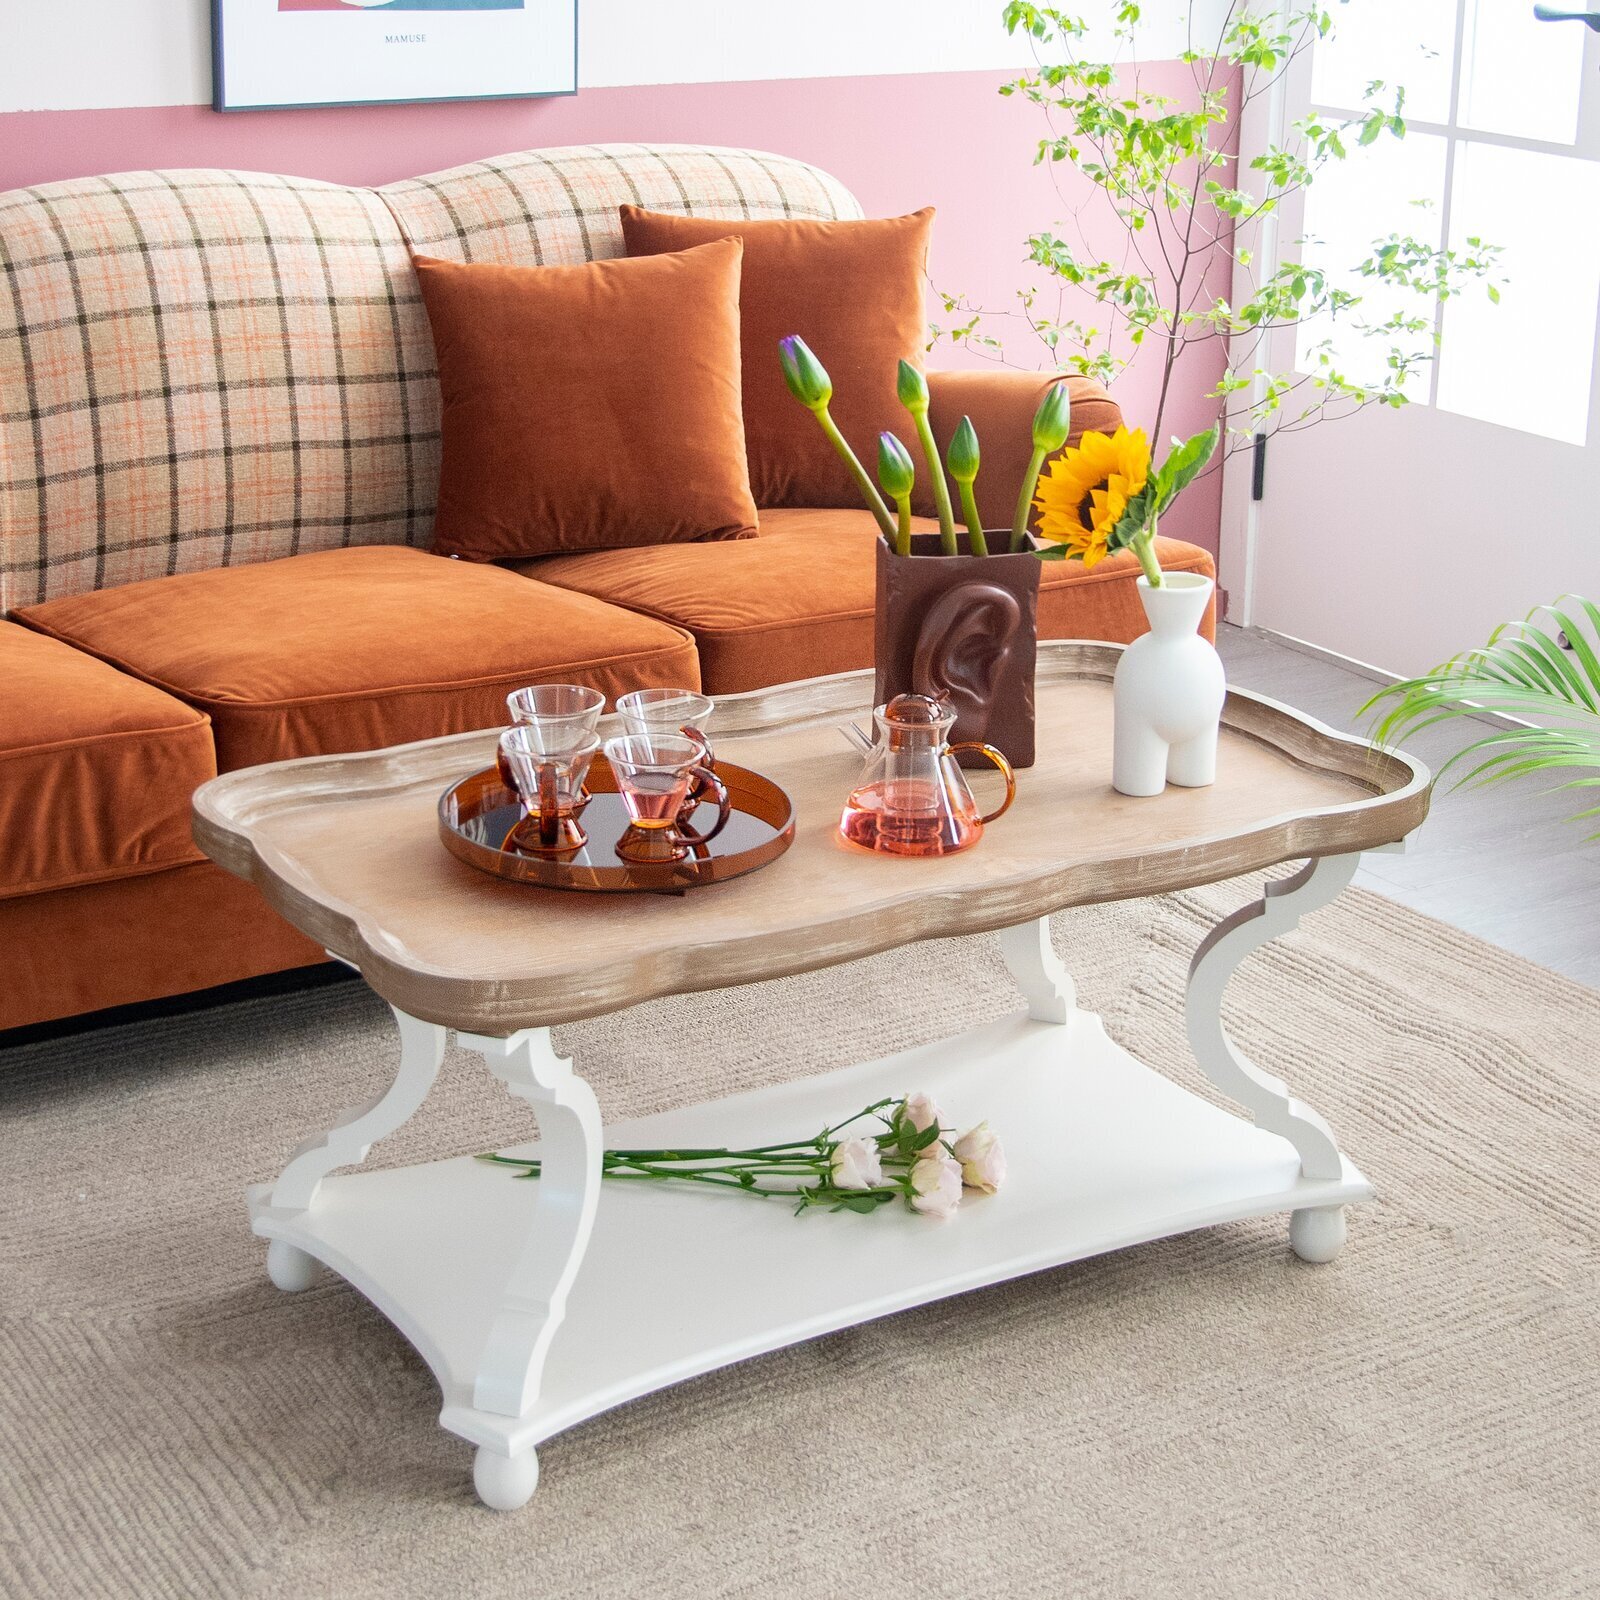 Shabby chic coffee table for hosting